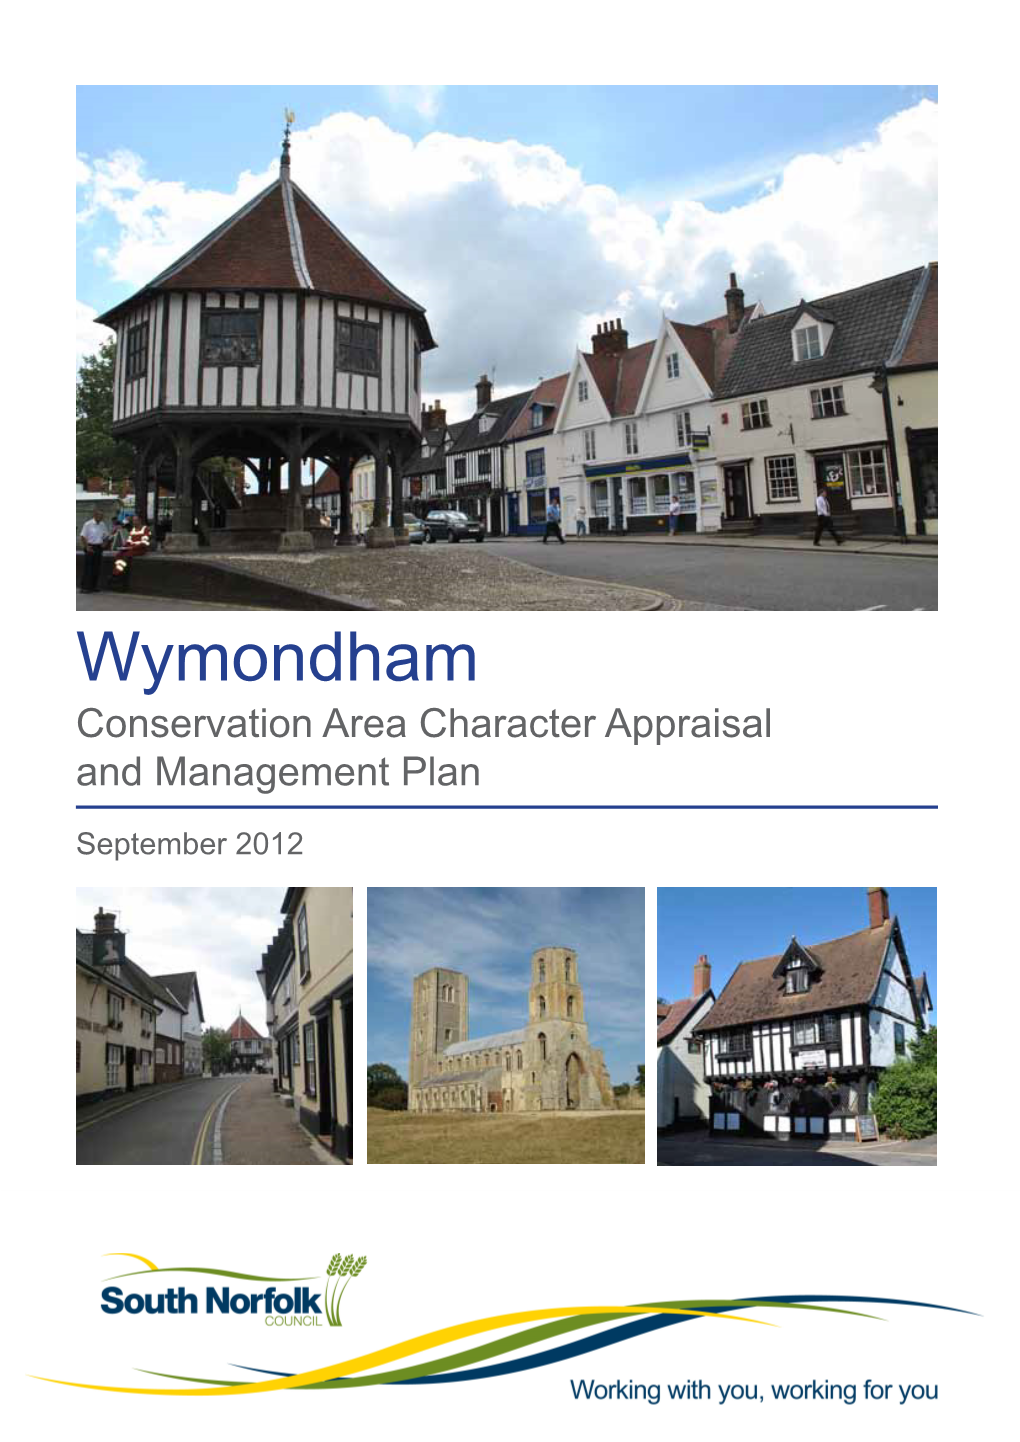 Wymondham Conservation Area Character Appraisal and Management Plan